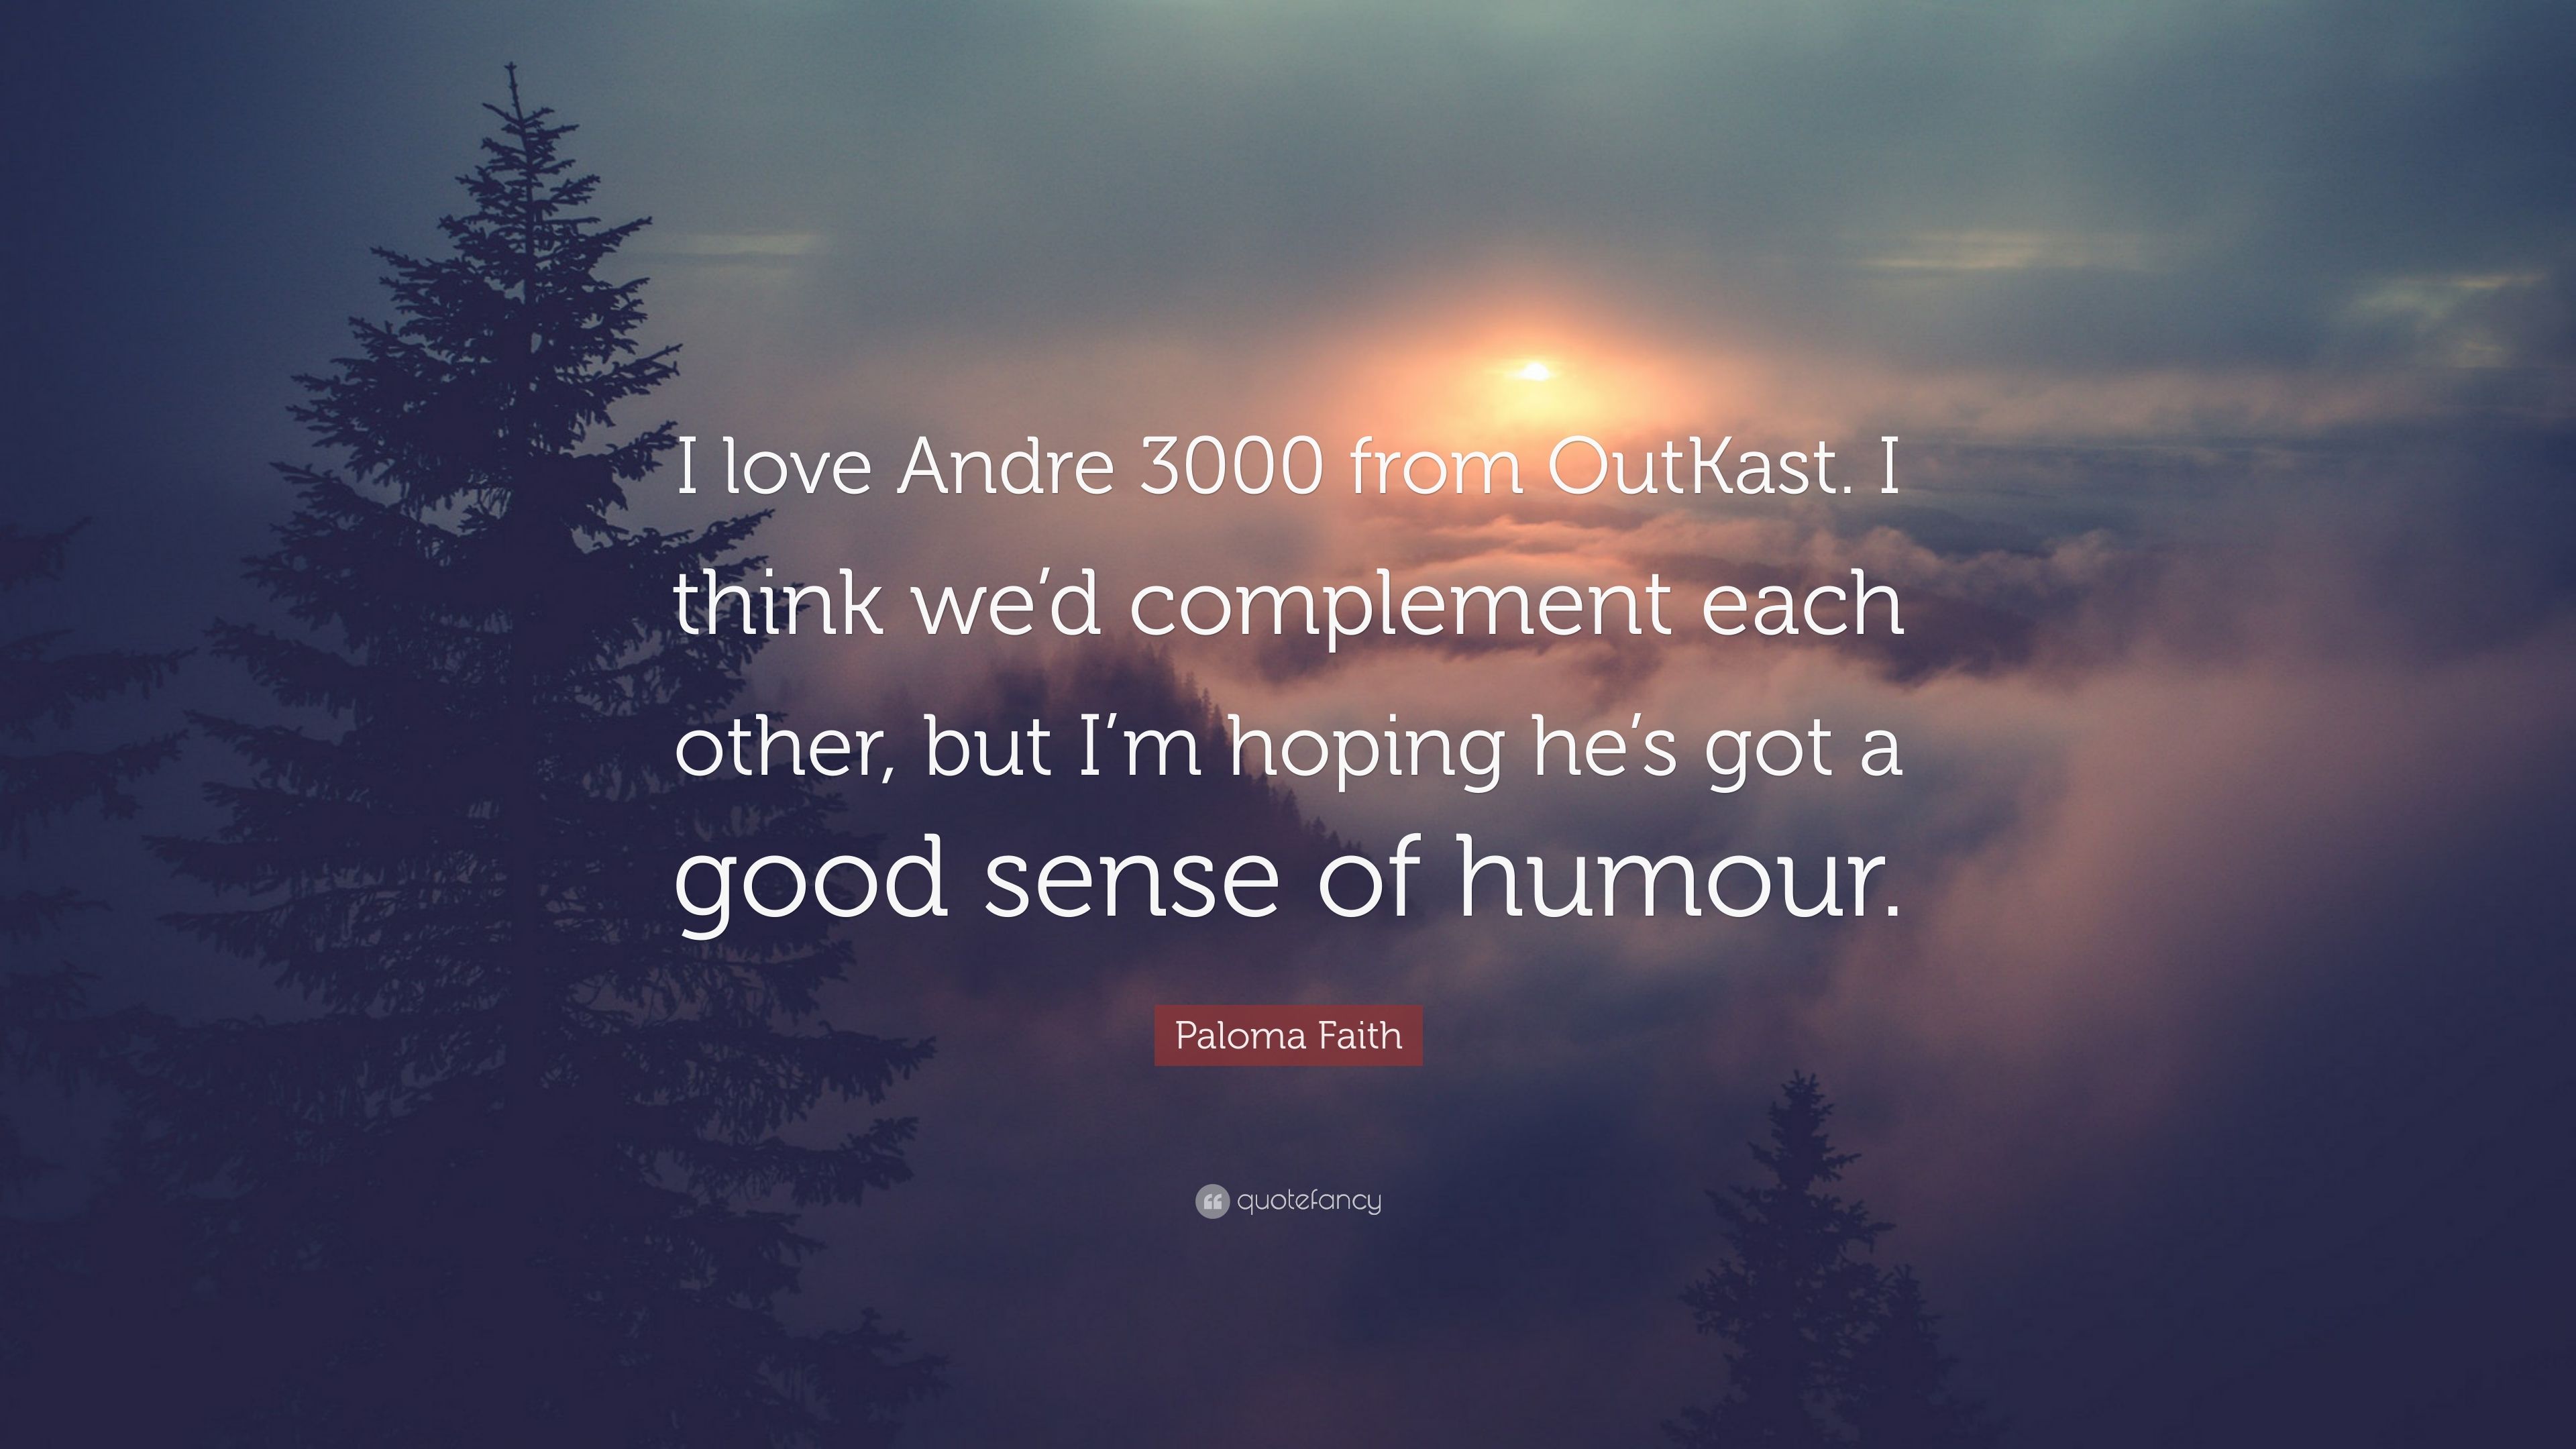 Paloma Faith Quote: “I love Andre 3000 from OutKast. I think we'd